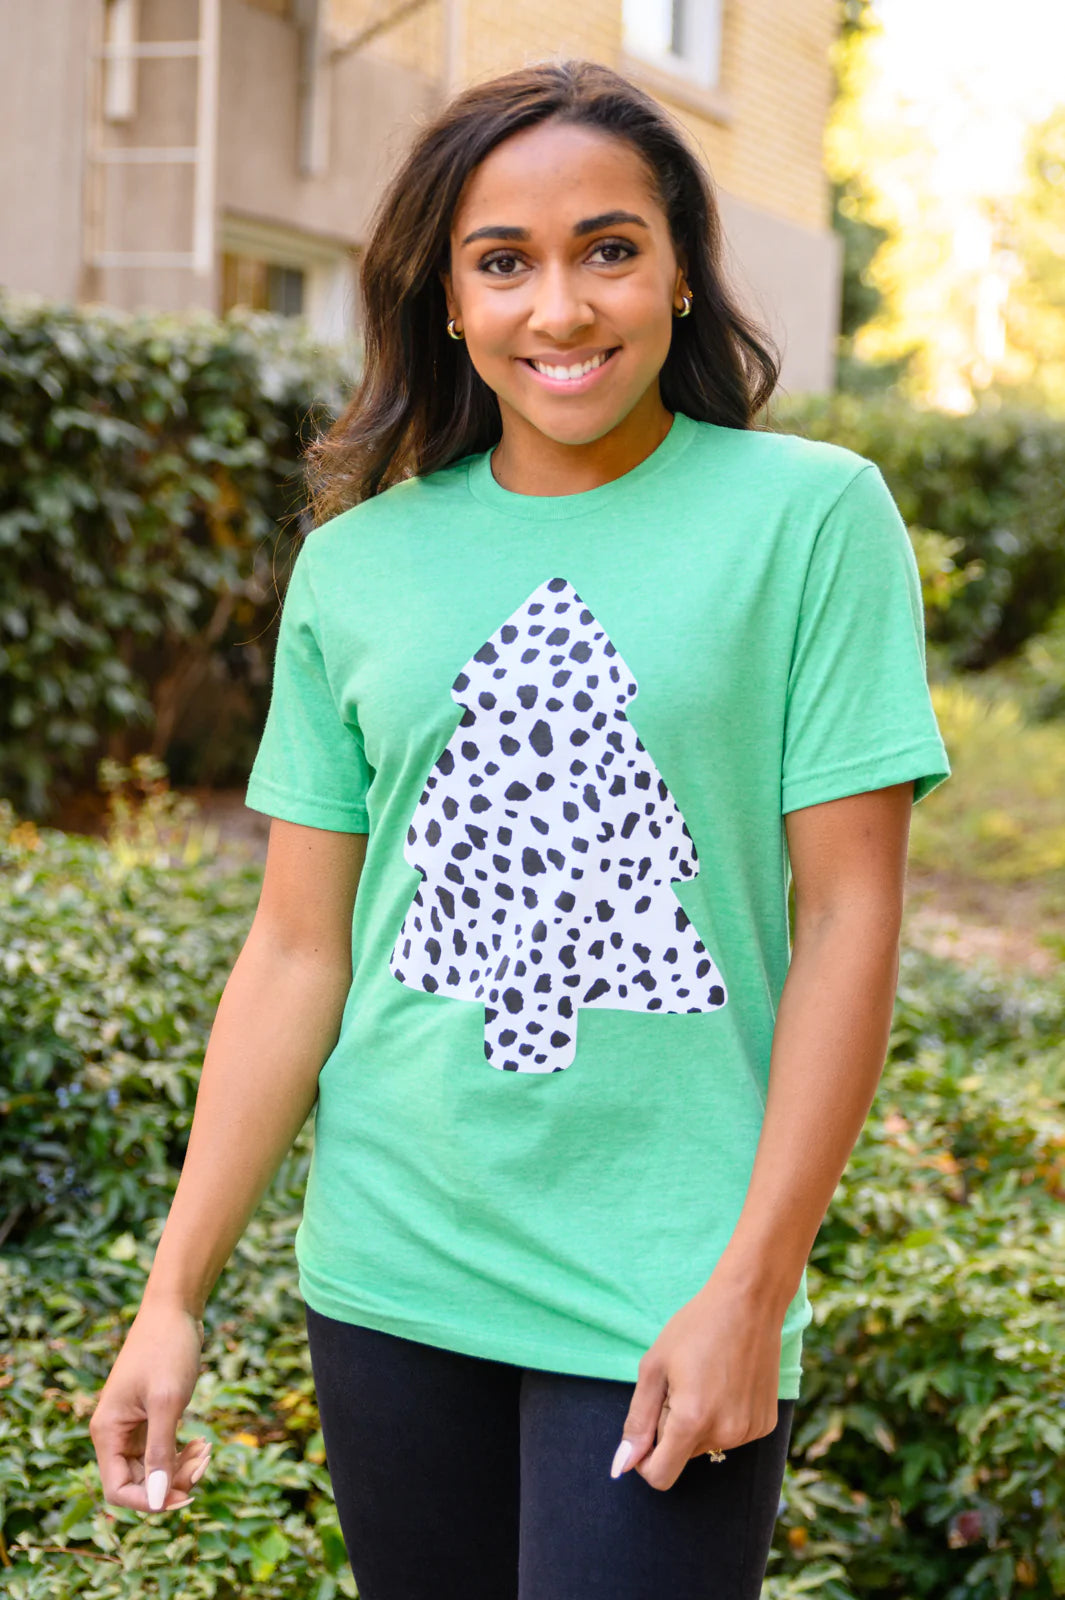 Brand Collab Dalmatian Tree Graphic Tee in Kelly Green